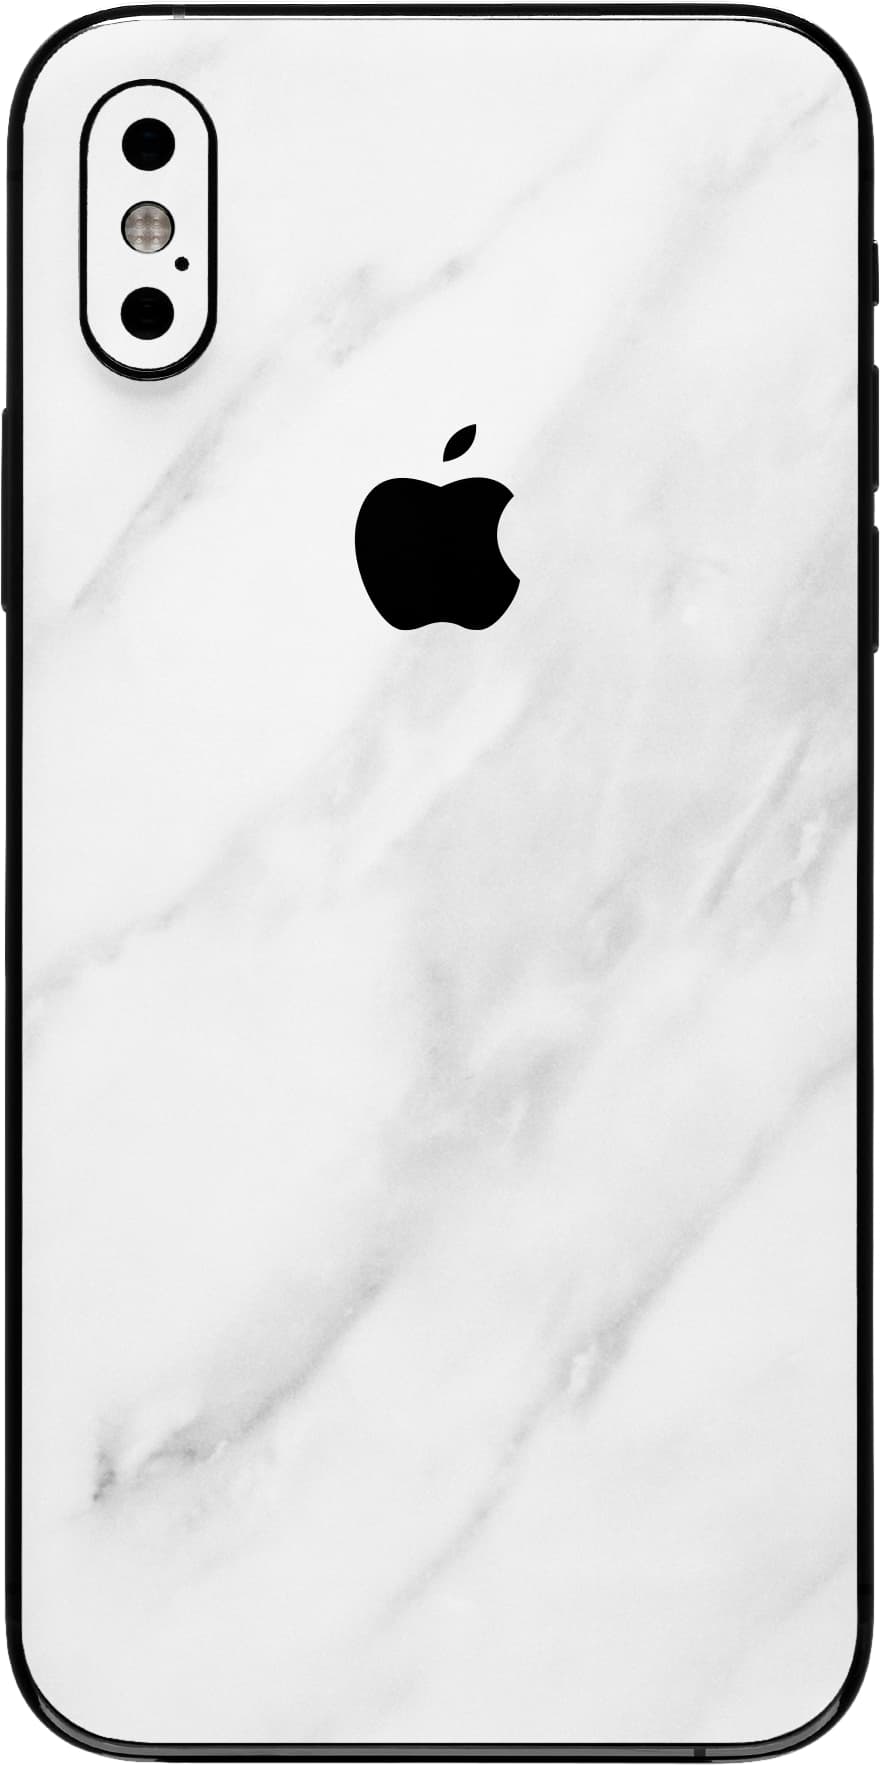 iPhone XS Skins, Covers » dbrand